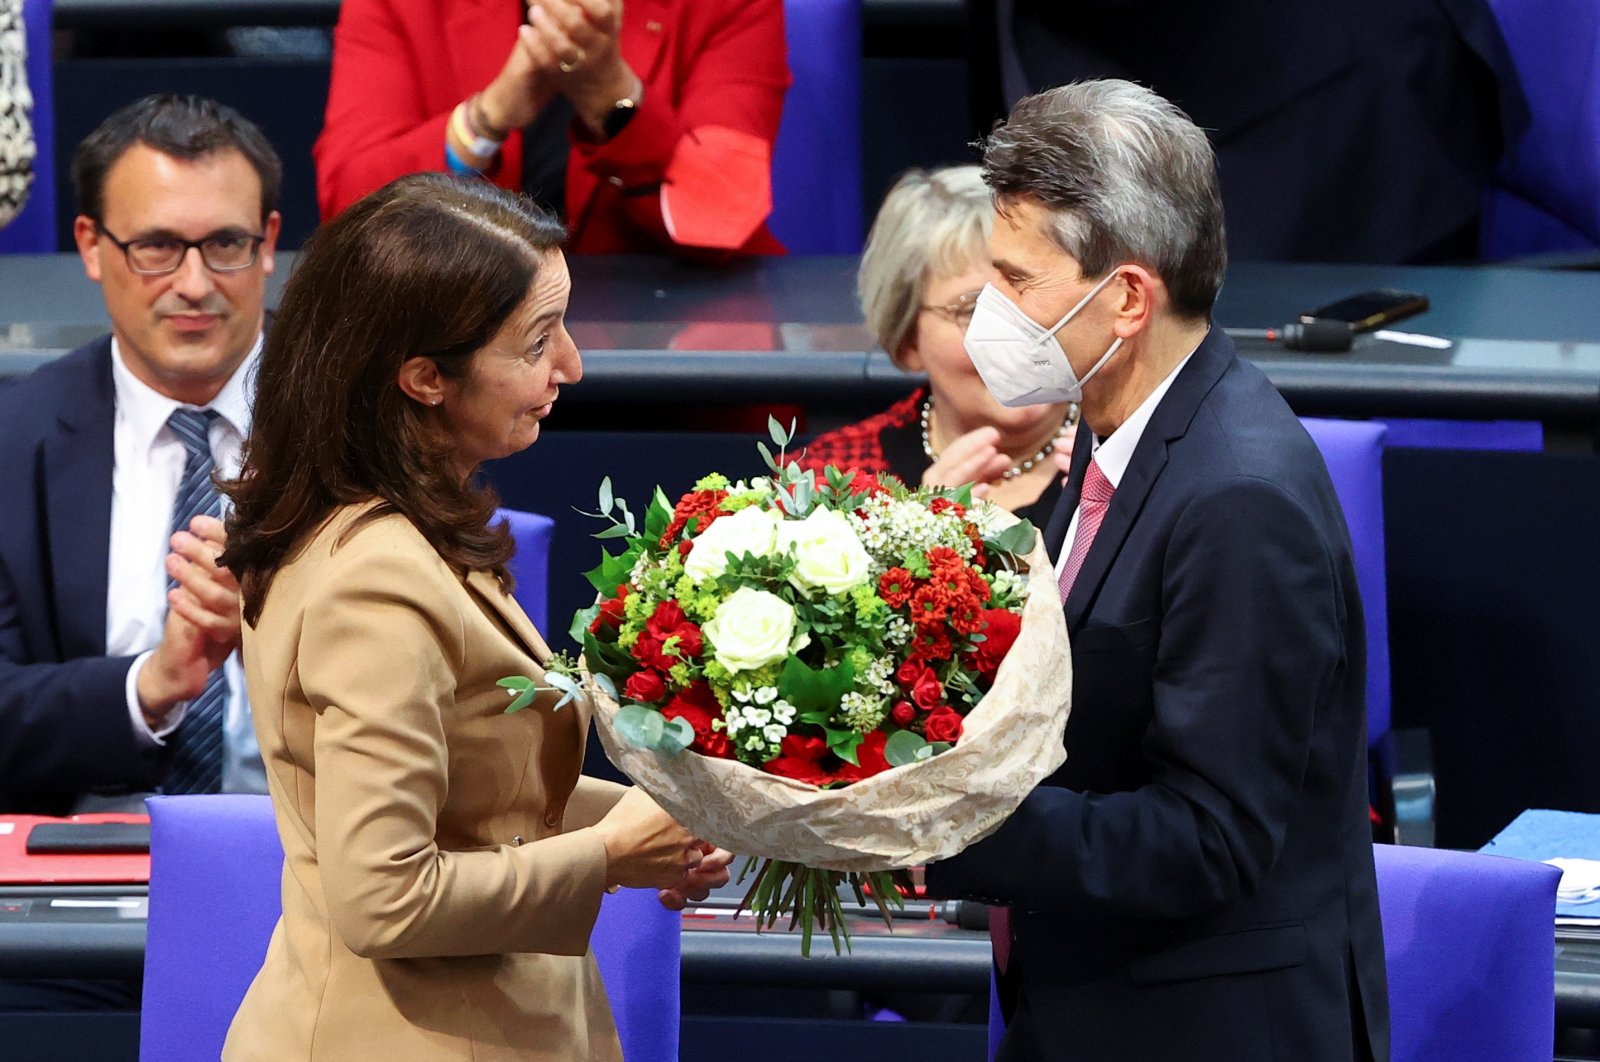 Aydan Özoğuz of the Social Democratic Party (SPD) receives flowers after being elected the Vice President during the inaugural session of the German lower house of Parliament Bundestag in Berlin, Germany, Oct. 26, 2021. (REUTERS/Fabrizio Bensch)